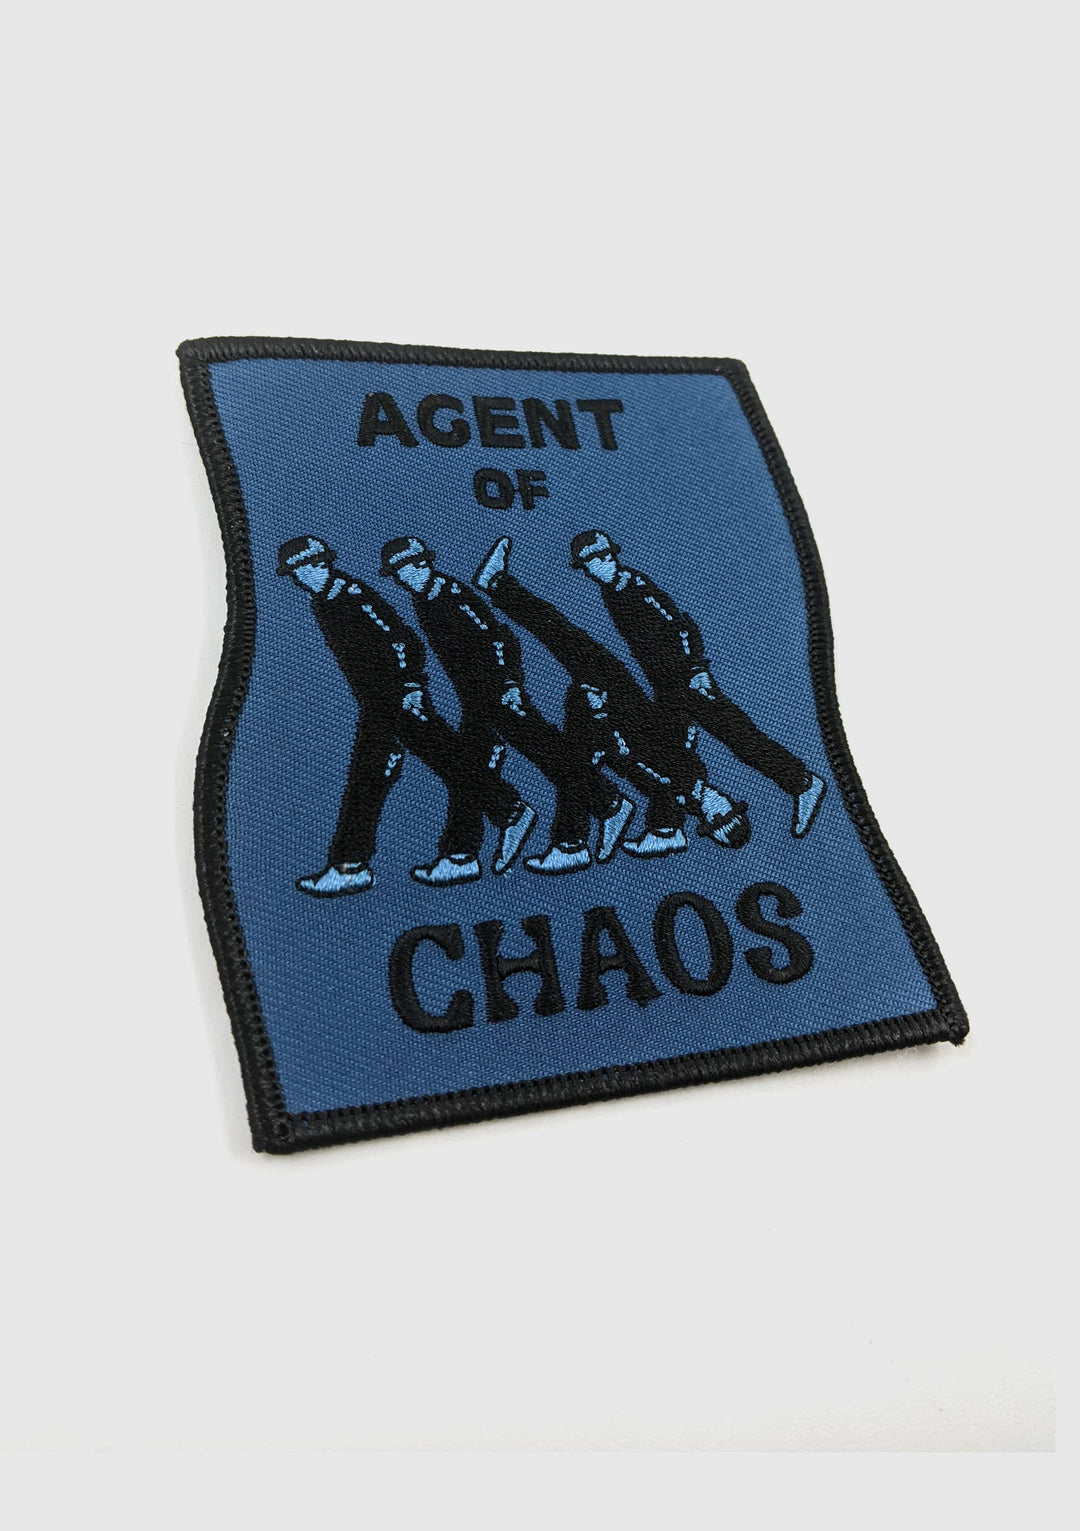 Badaboom - Agent of Chaos Patch